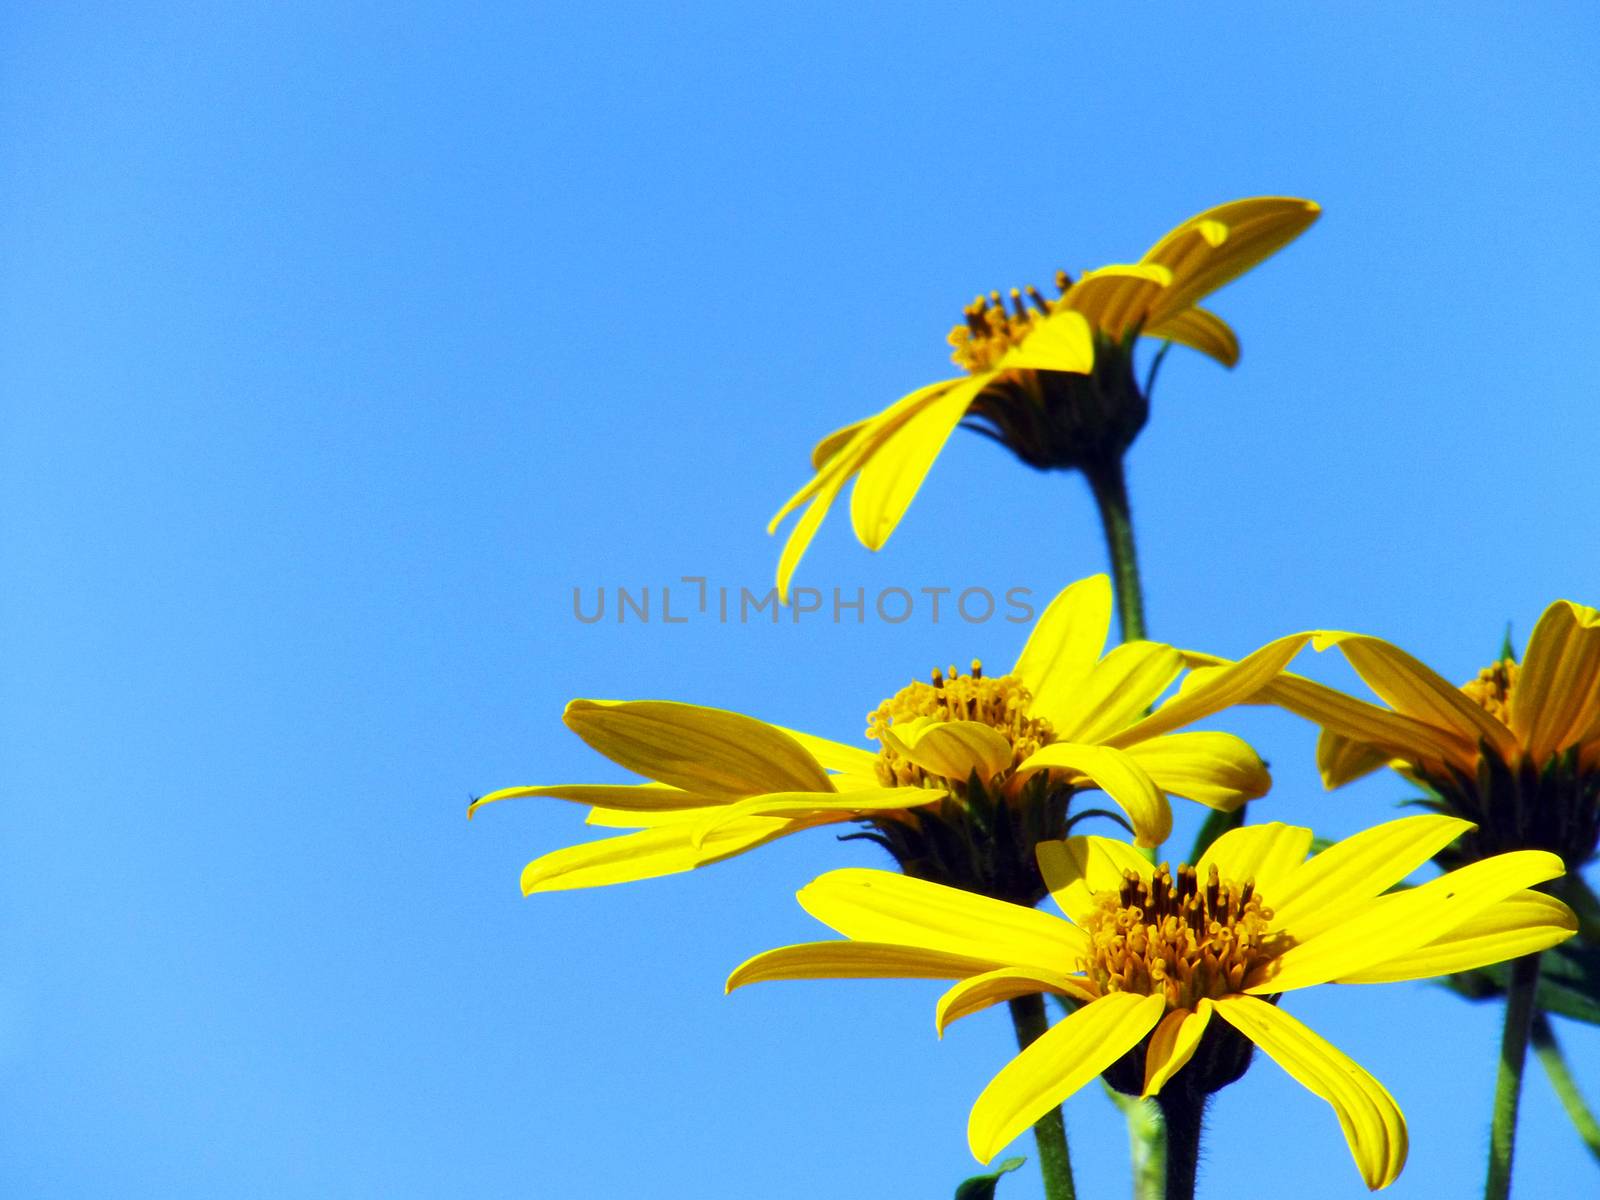 Bright yellow flowers on blue sky background